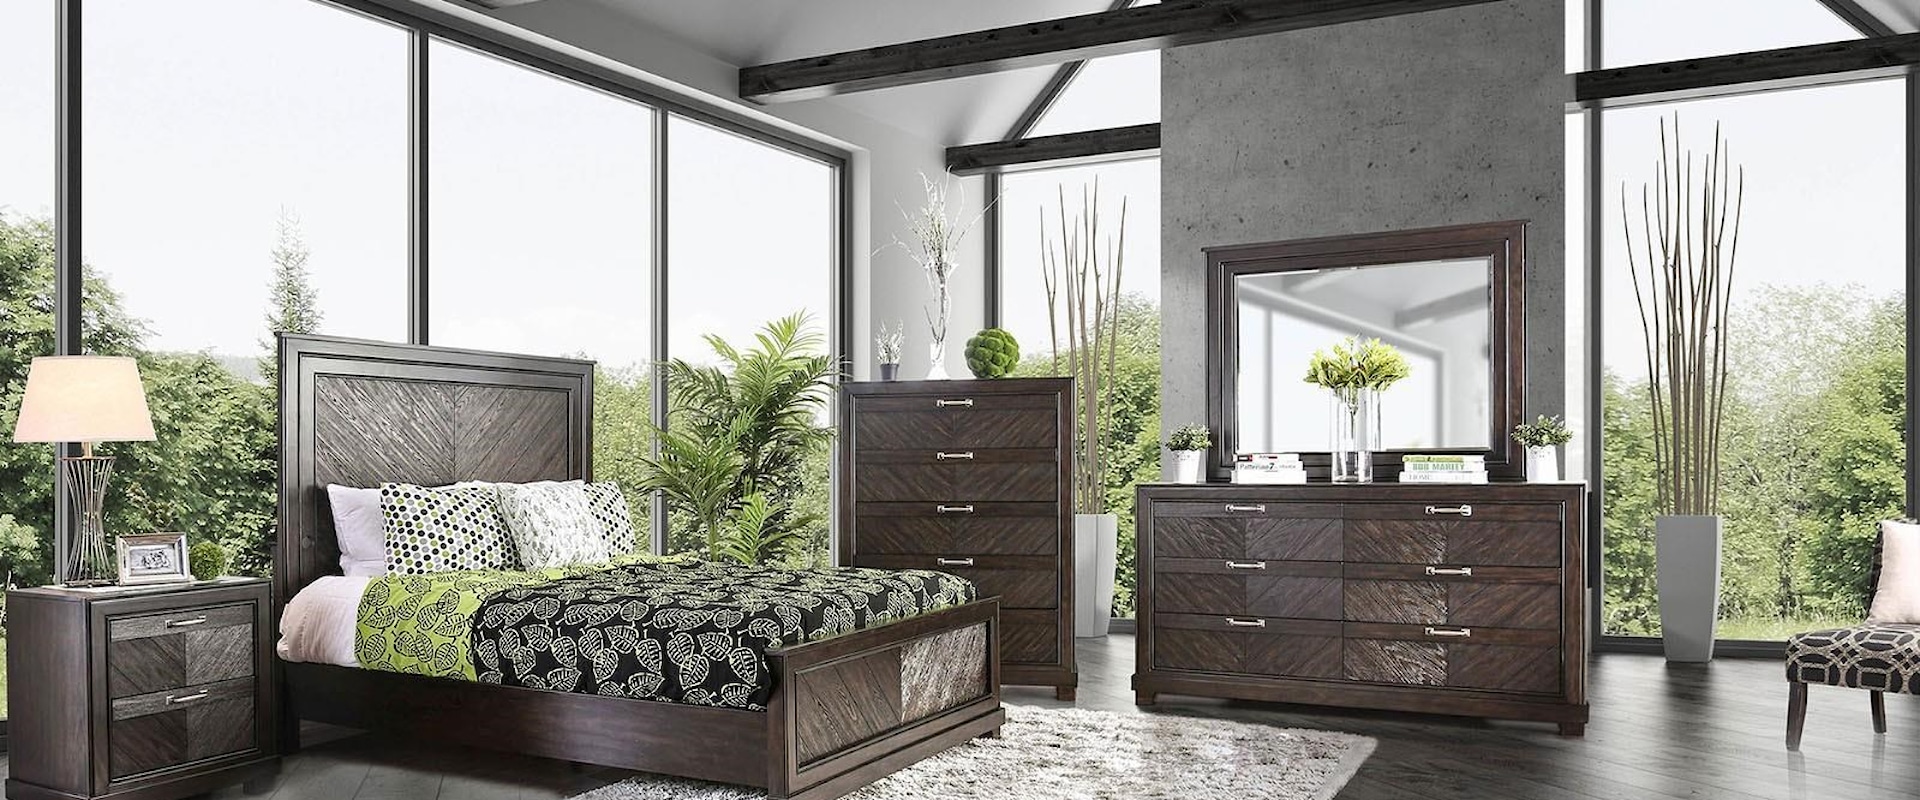 Transitional Style Platform Queen Bedroom Group